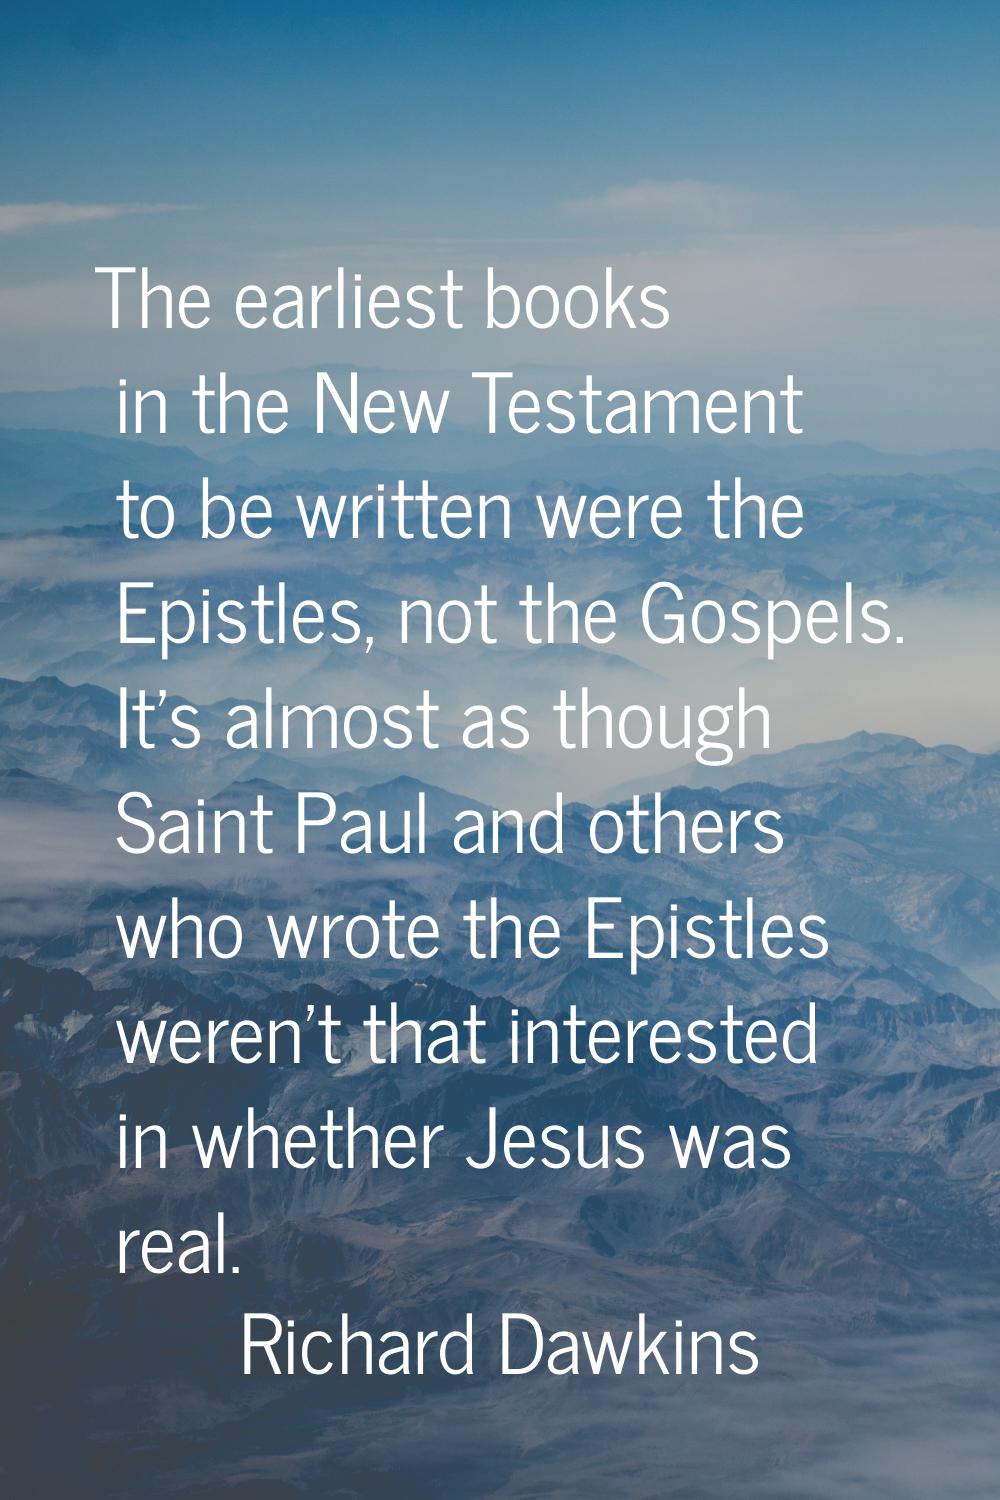 The earliest books in the New Testament to be written were the Epistles, not the Gospels. It's almo